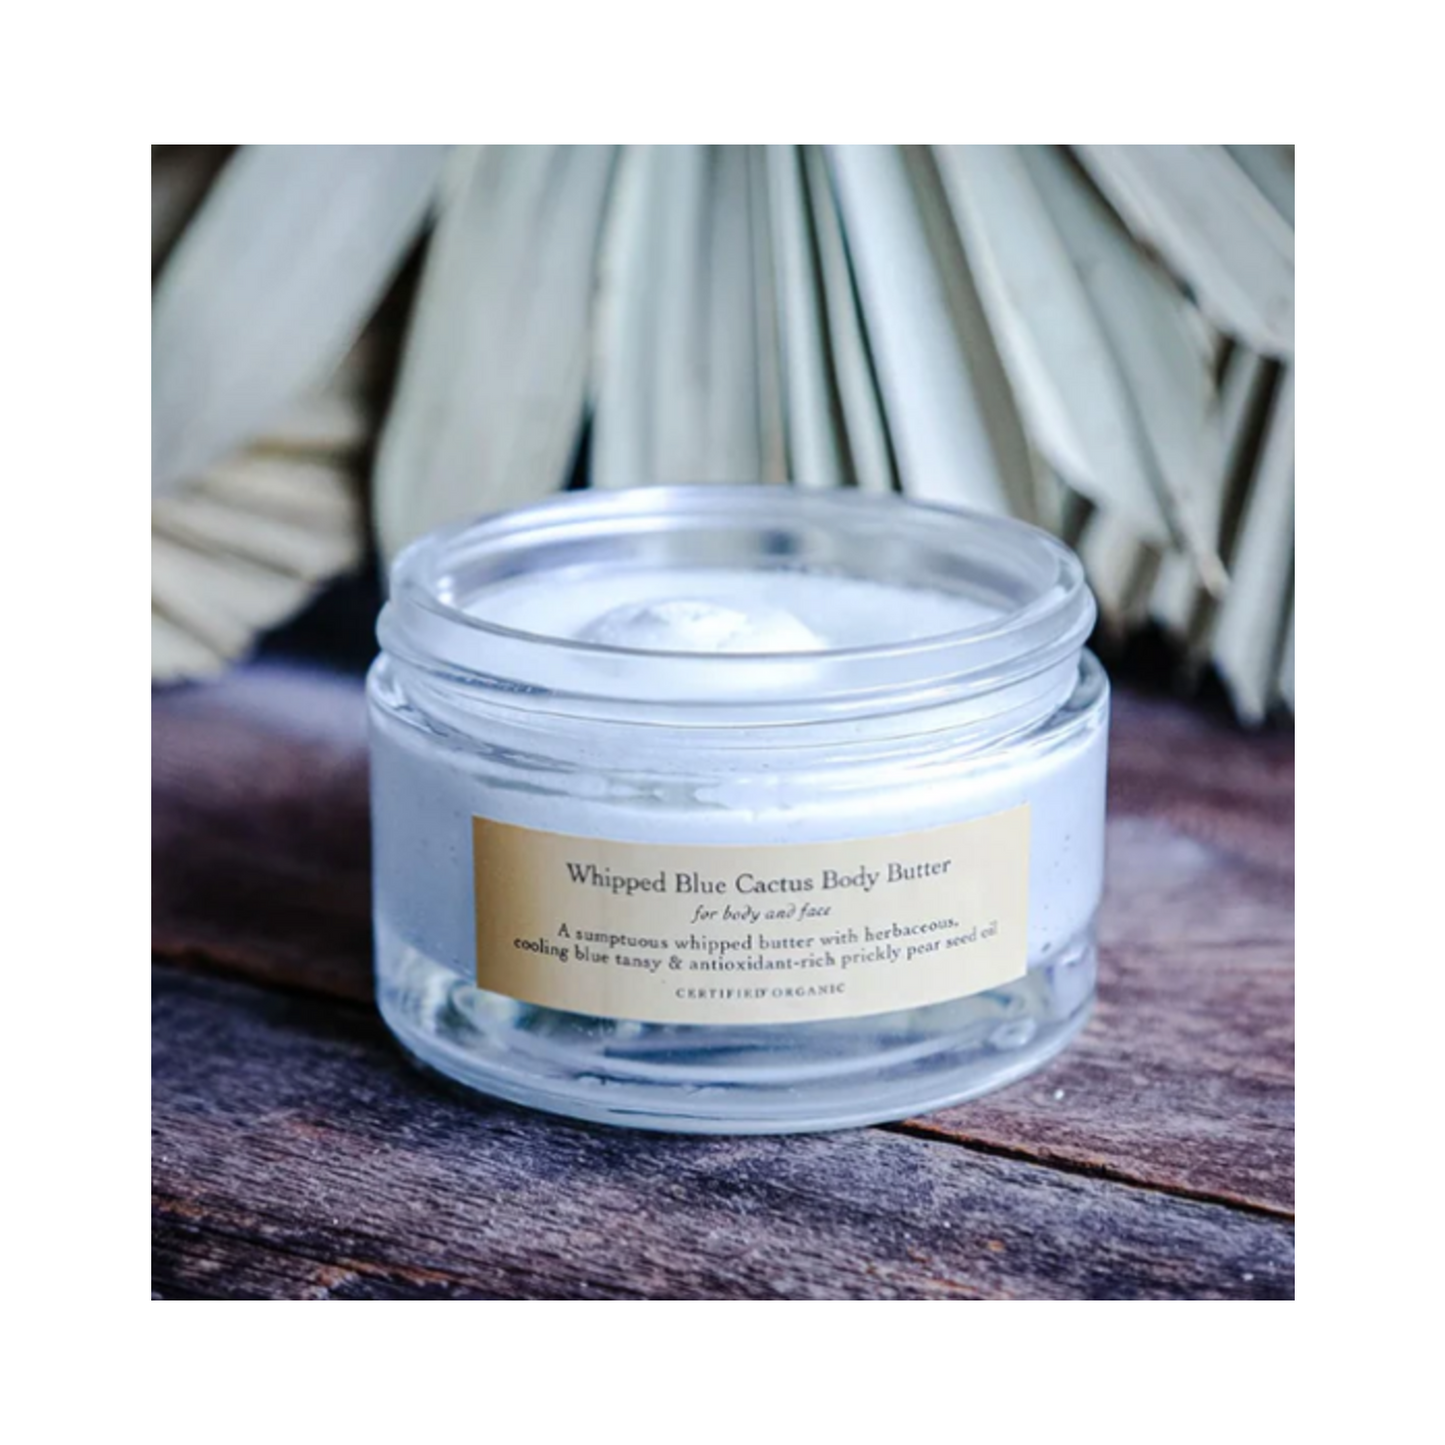 Evanhealy Whipped Blue Cactus Body Butter